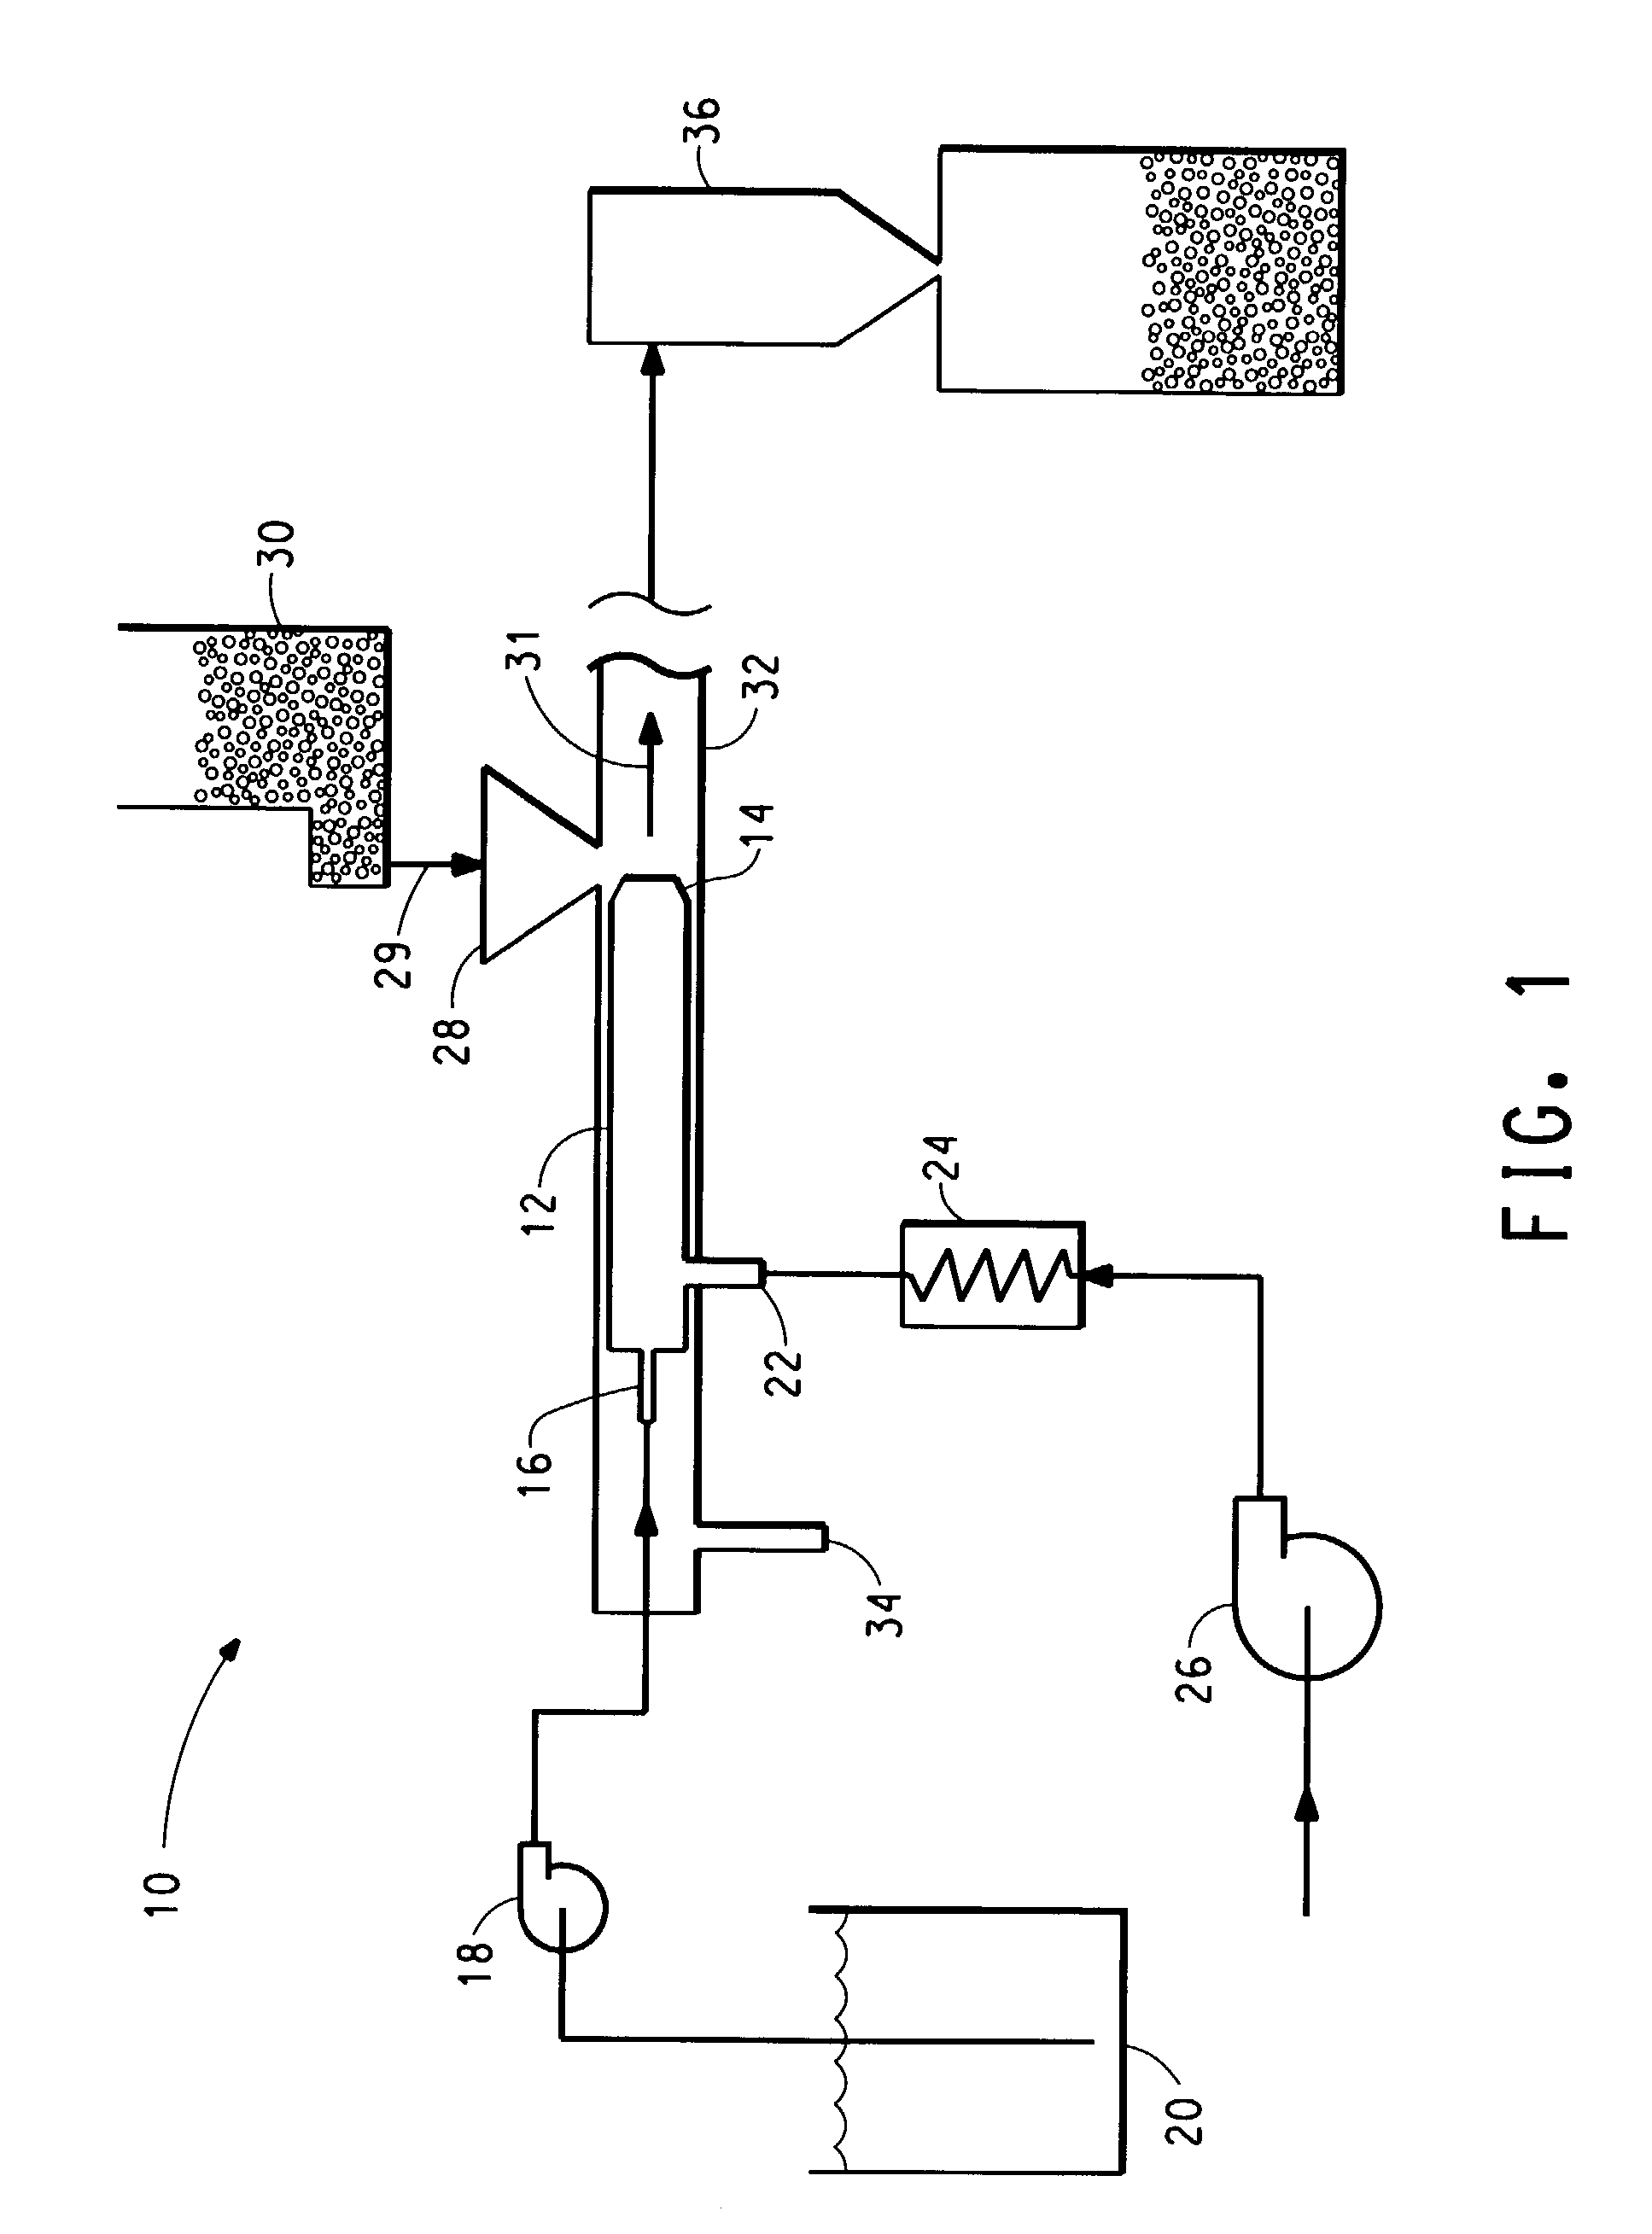 Process for dry coating a food particle or encapsulating a frozen liquid particle